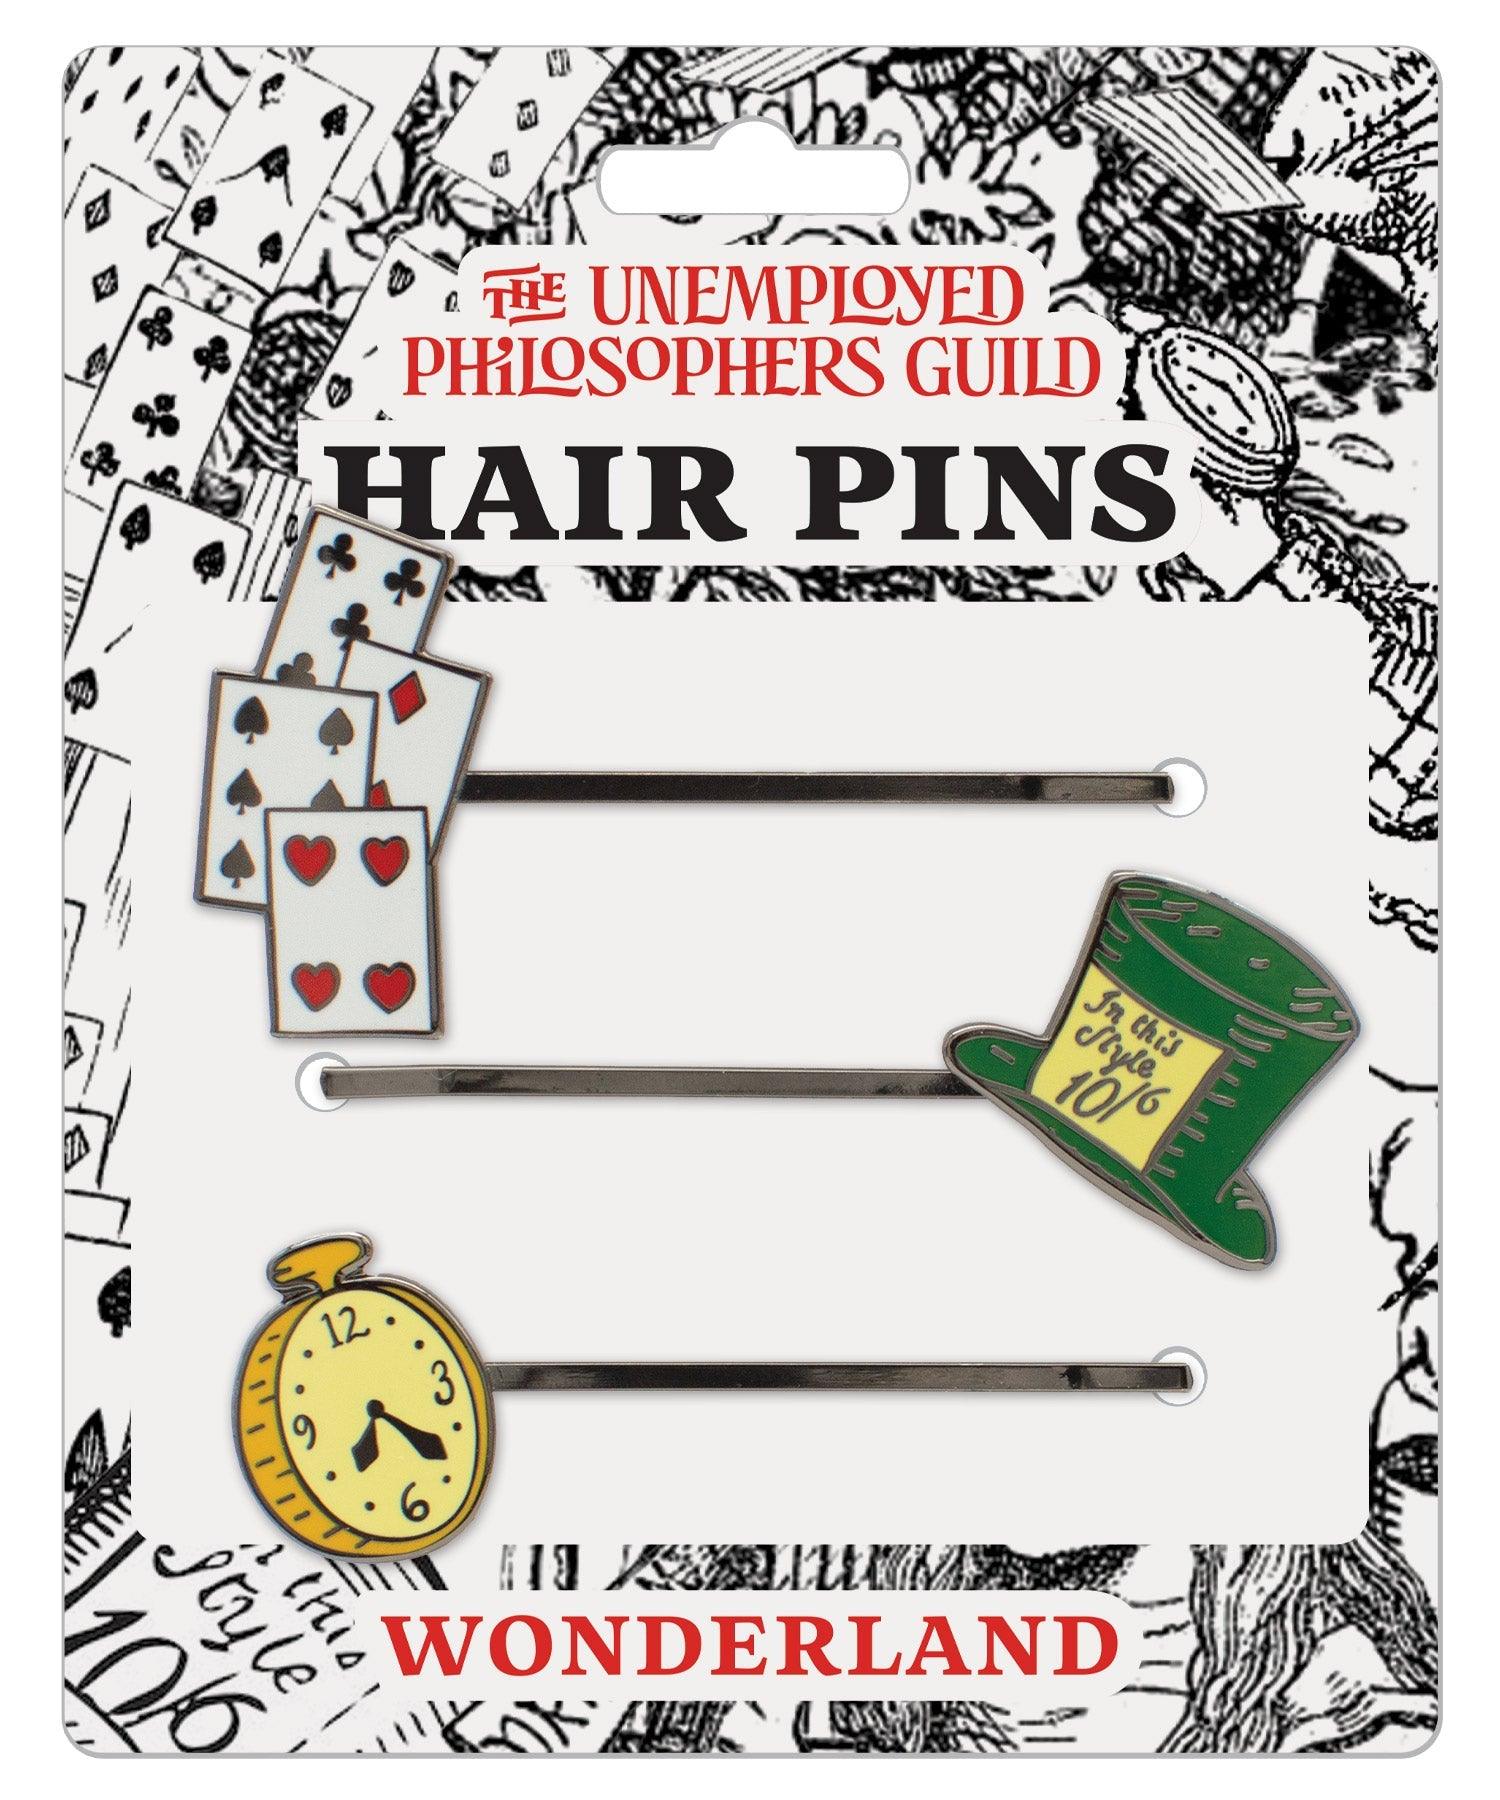 Product photo of Wonderland Hair Pins Set, a novelty gift manufactured by The Unemployed Philosophers Guild.